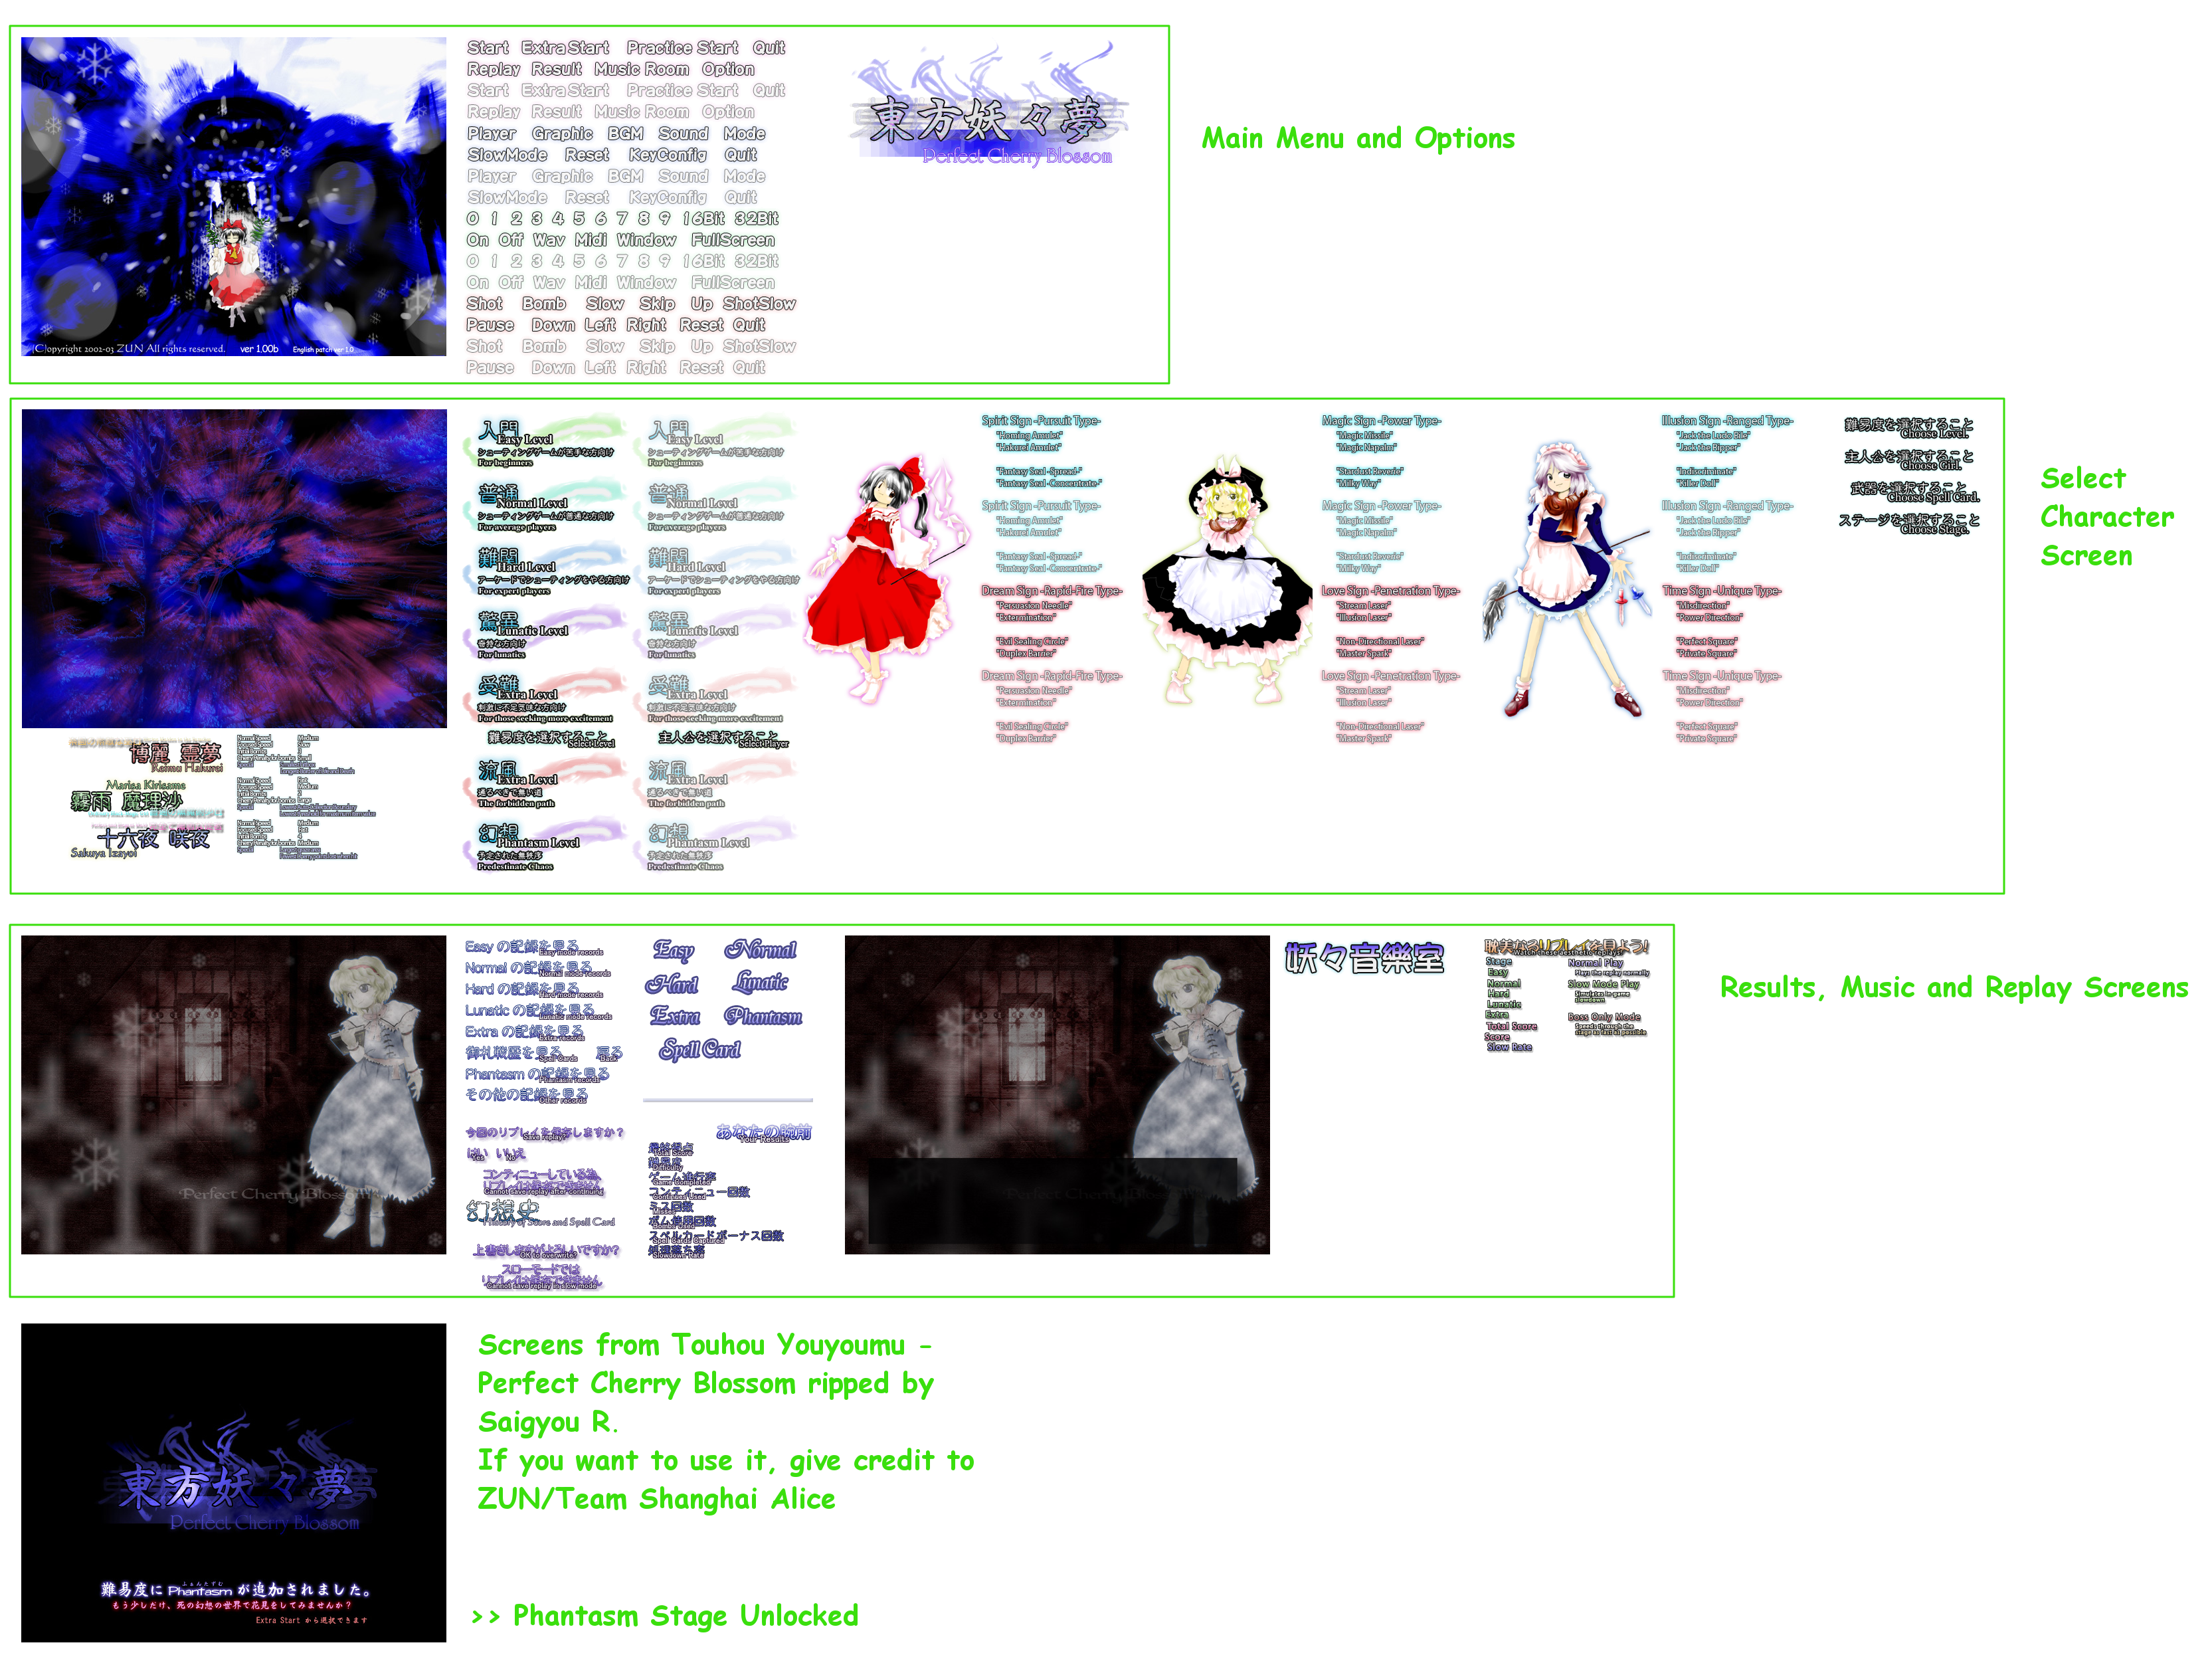 Touhou Youyoumu (Perfect Cherry Blossom) - Menu and Other Screens (English Patch)